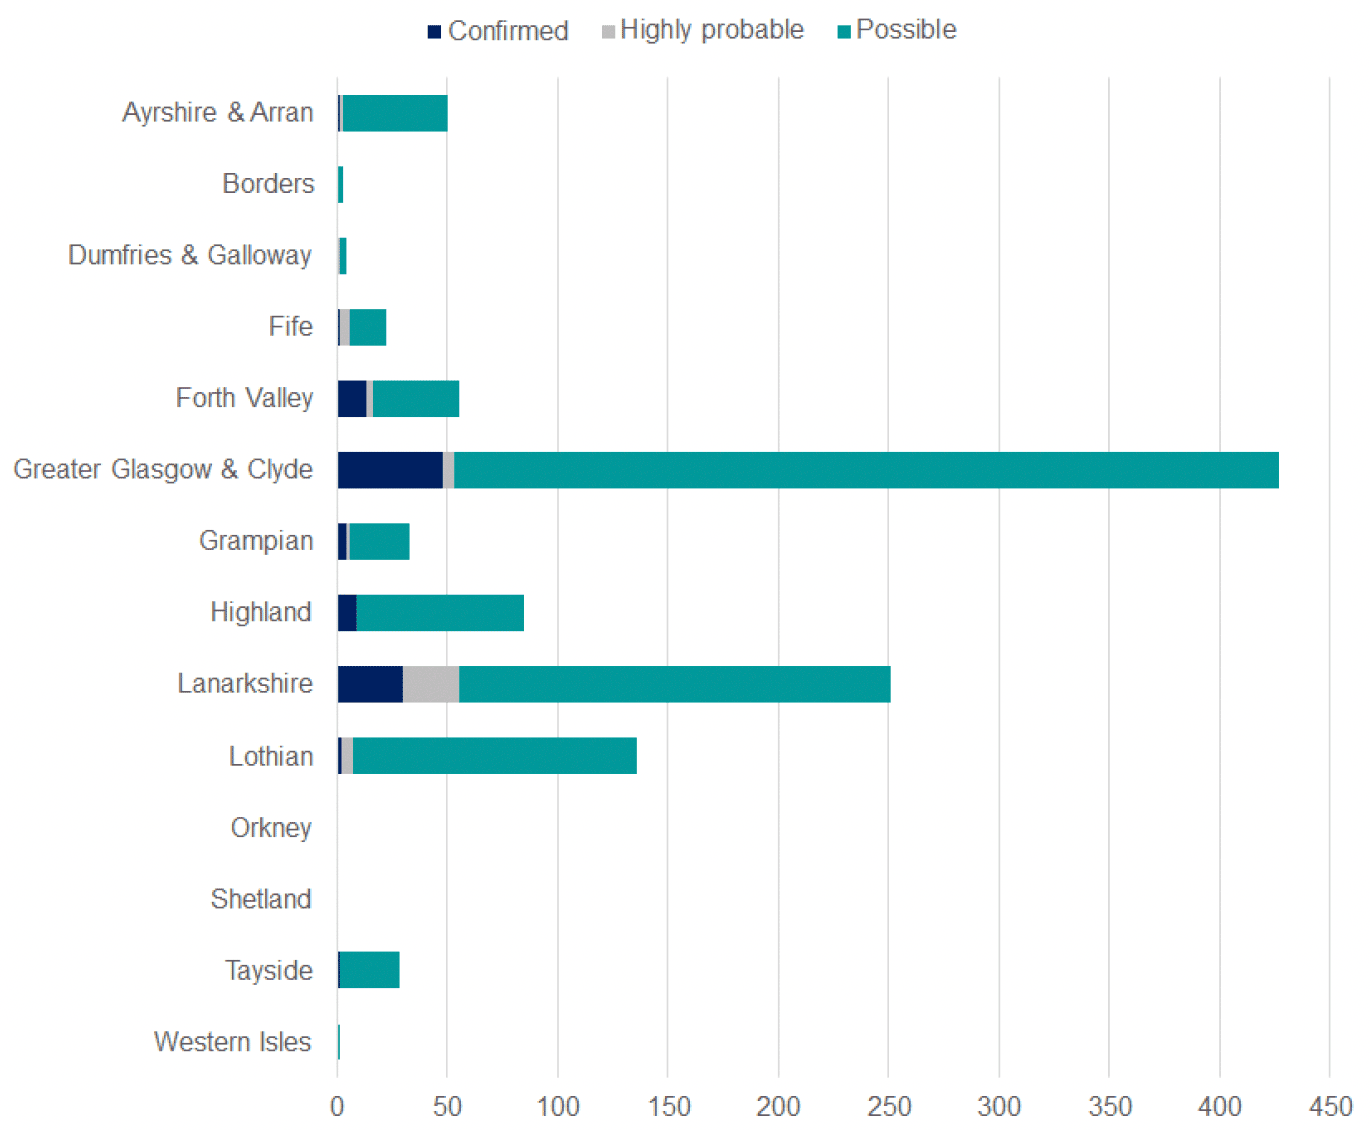 As of 9 December 2021, confirmed cases were highest in Greater Glasgow and Clyde, followed by Lanarkshire and Forth Valley. No confirmed cases were in Borders, Dumfries and Galloway, Orkney, Shetland or the Western Isles. Highly probable cases were highest in Lanarkshire followed by Greater Glasgow and Clyde and Lothian. No highly probable cases found in Borders, Highland, Orkney, Shetland, Tayside or the Western Isles. Possible cases were highest in Greater Glasgow and Clyde followed by Lanarkshire and Lothian. No possible cases were found in Orkney or Shetland. In total, the highest number of combined confirmed, highly probable and possible cases were in Greater Glasgow and Clyde, with 427 cases, followed by Lanarkshire, with 251 cases, and Lothian with 136 cases.